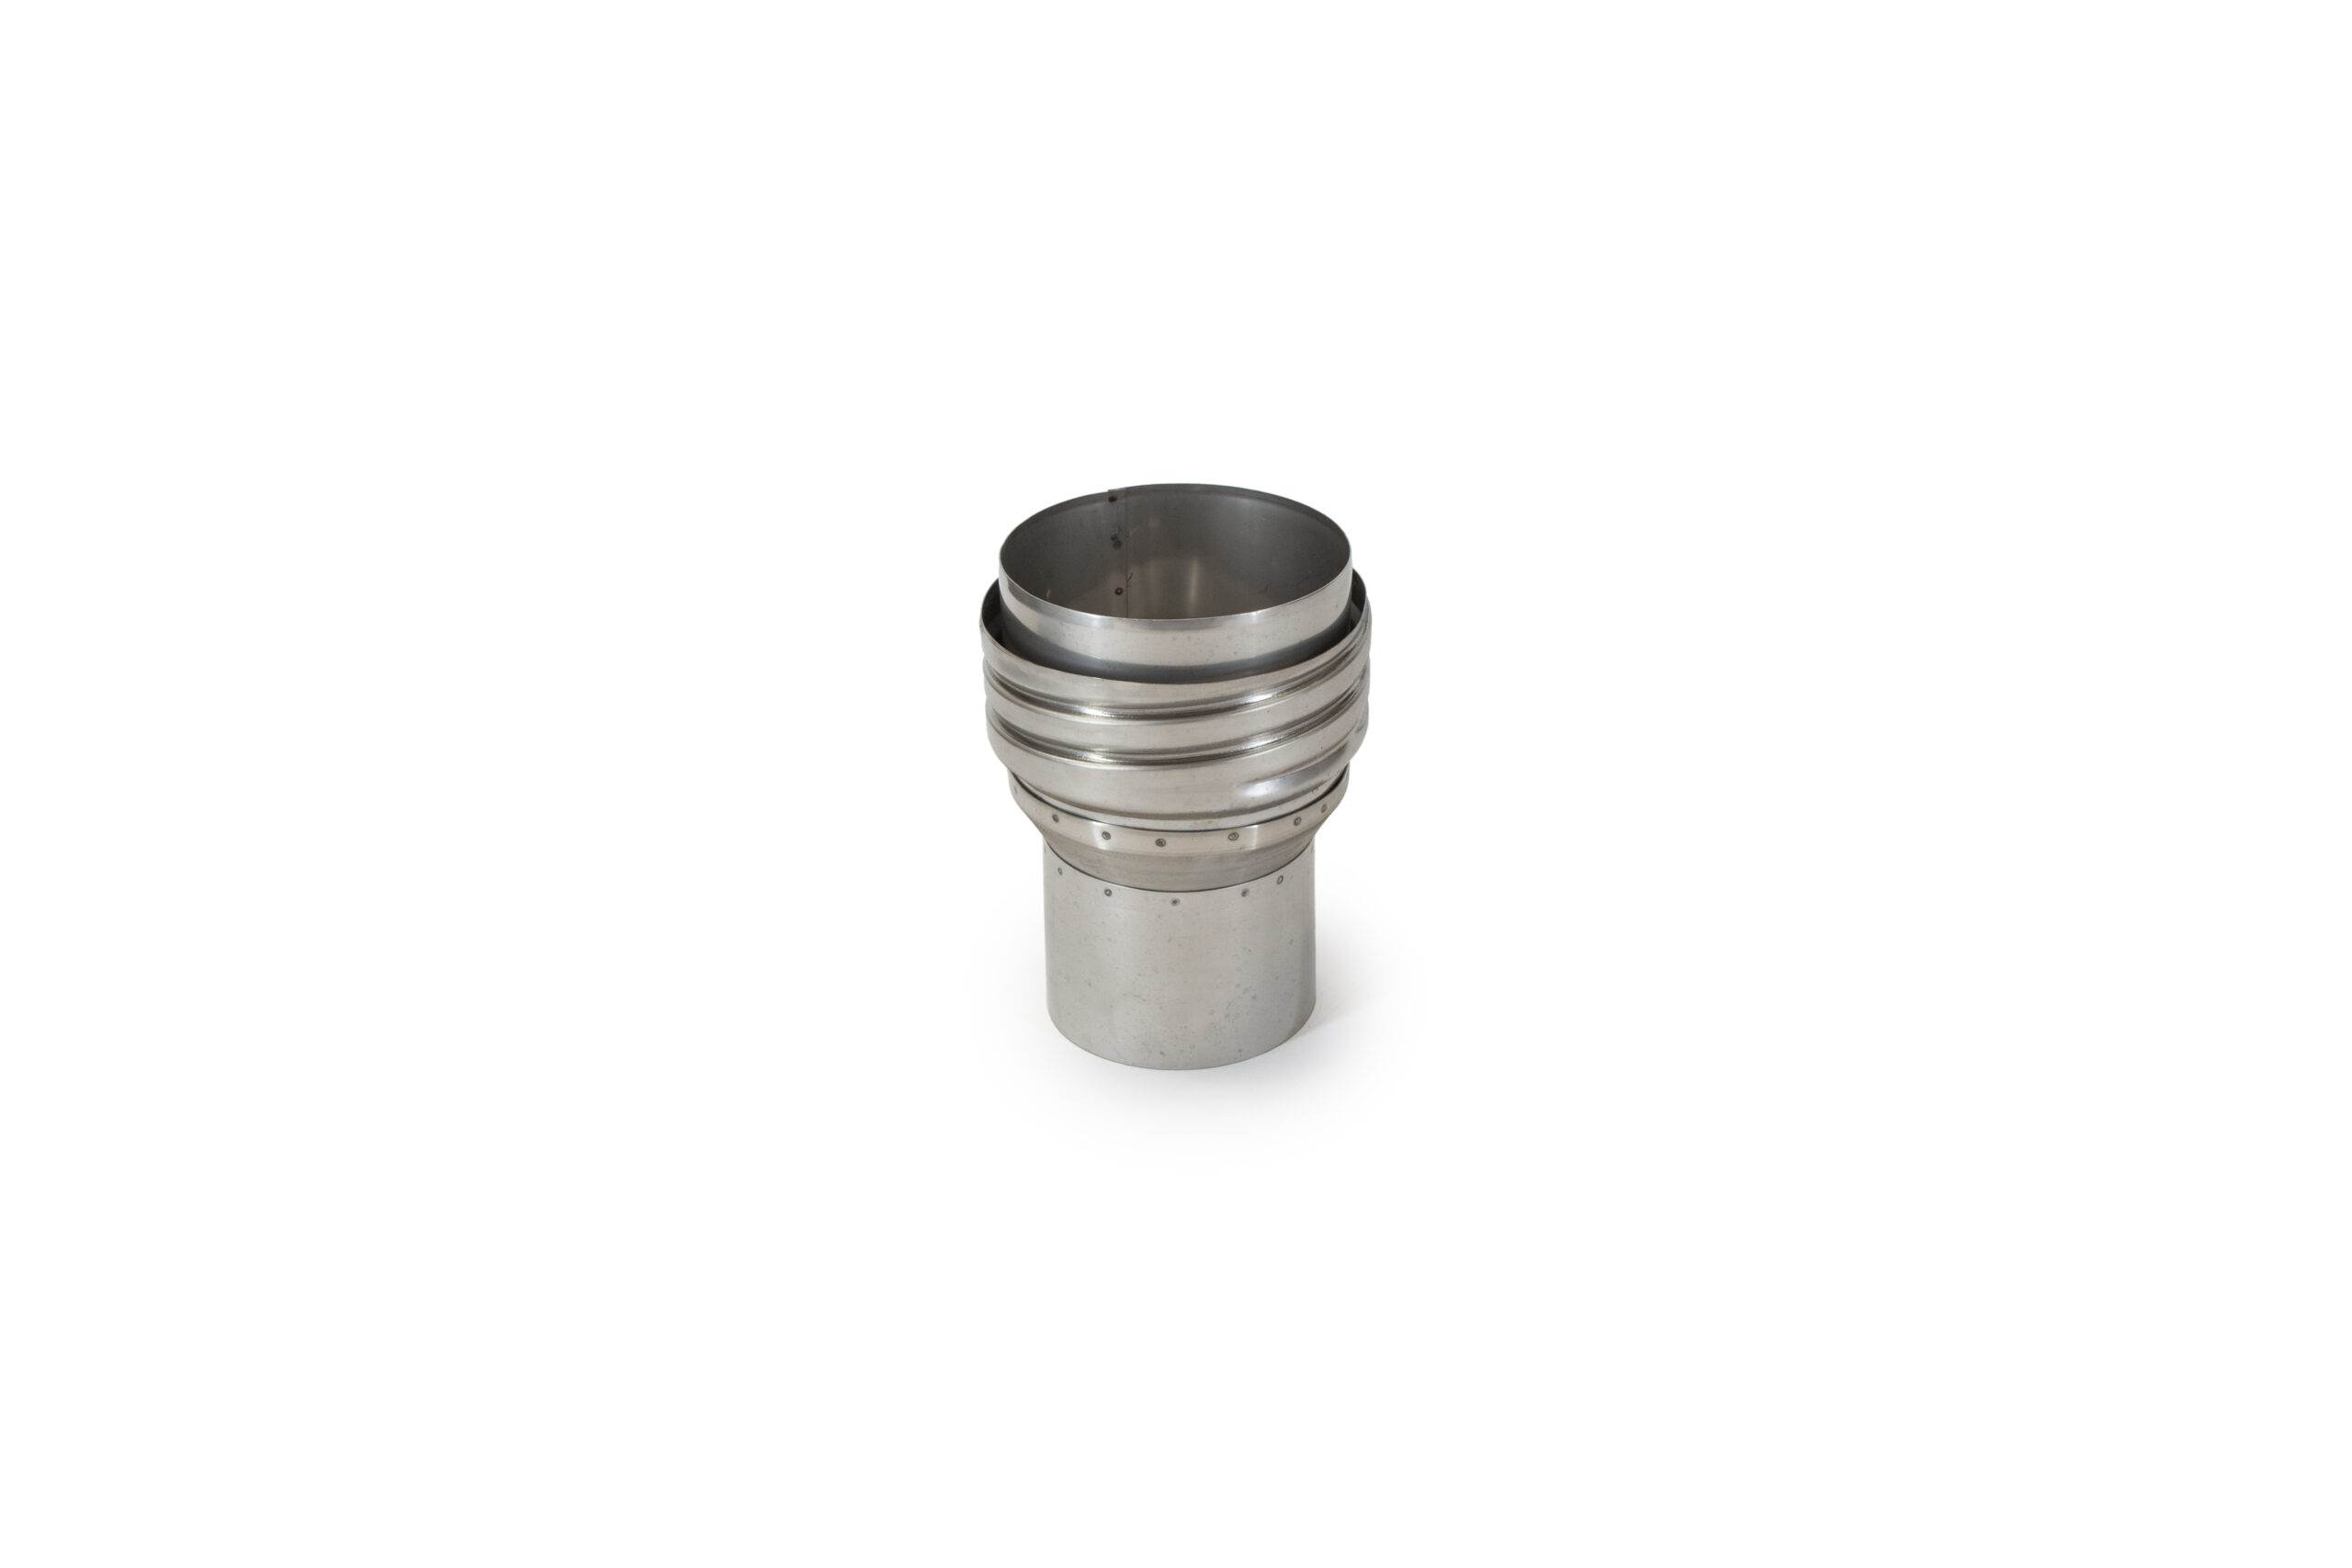 Flexible Liner to Flue Pipe Screw Reducer- Stainless Steel